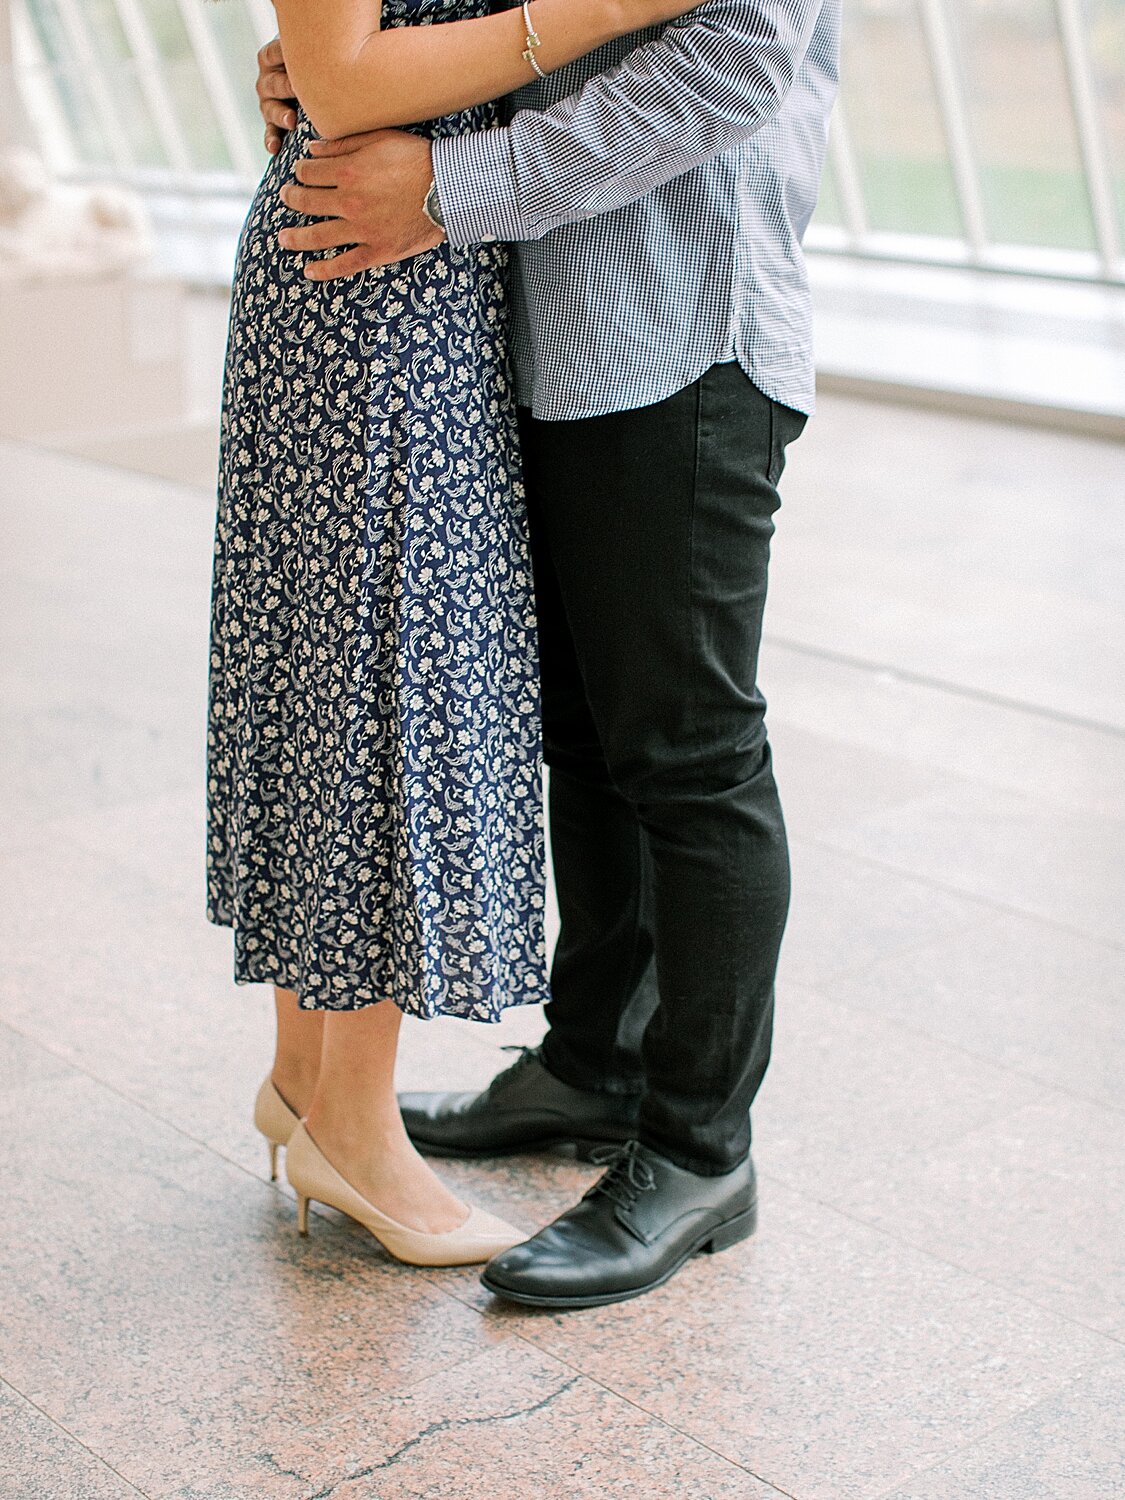 Asher Gardner Photography captures engagement photos at the Met